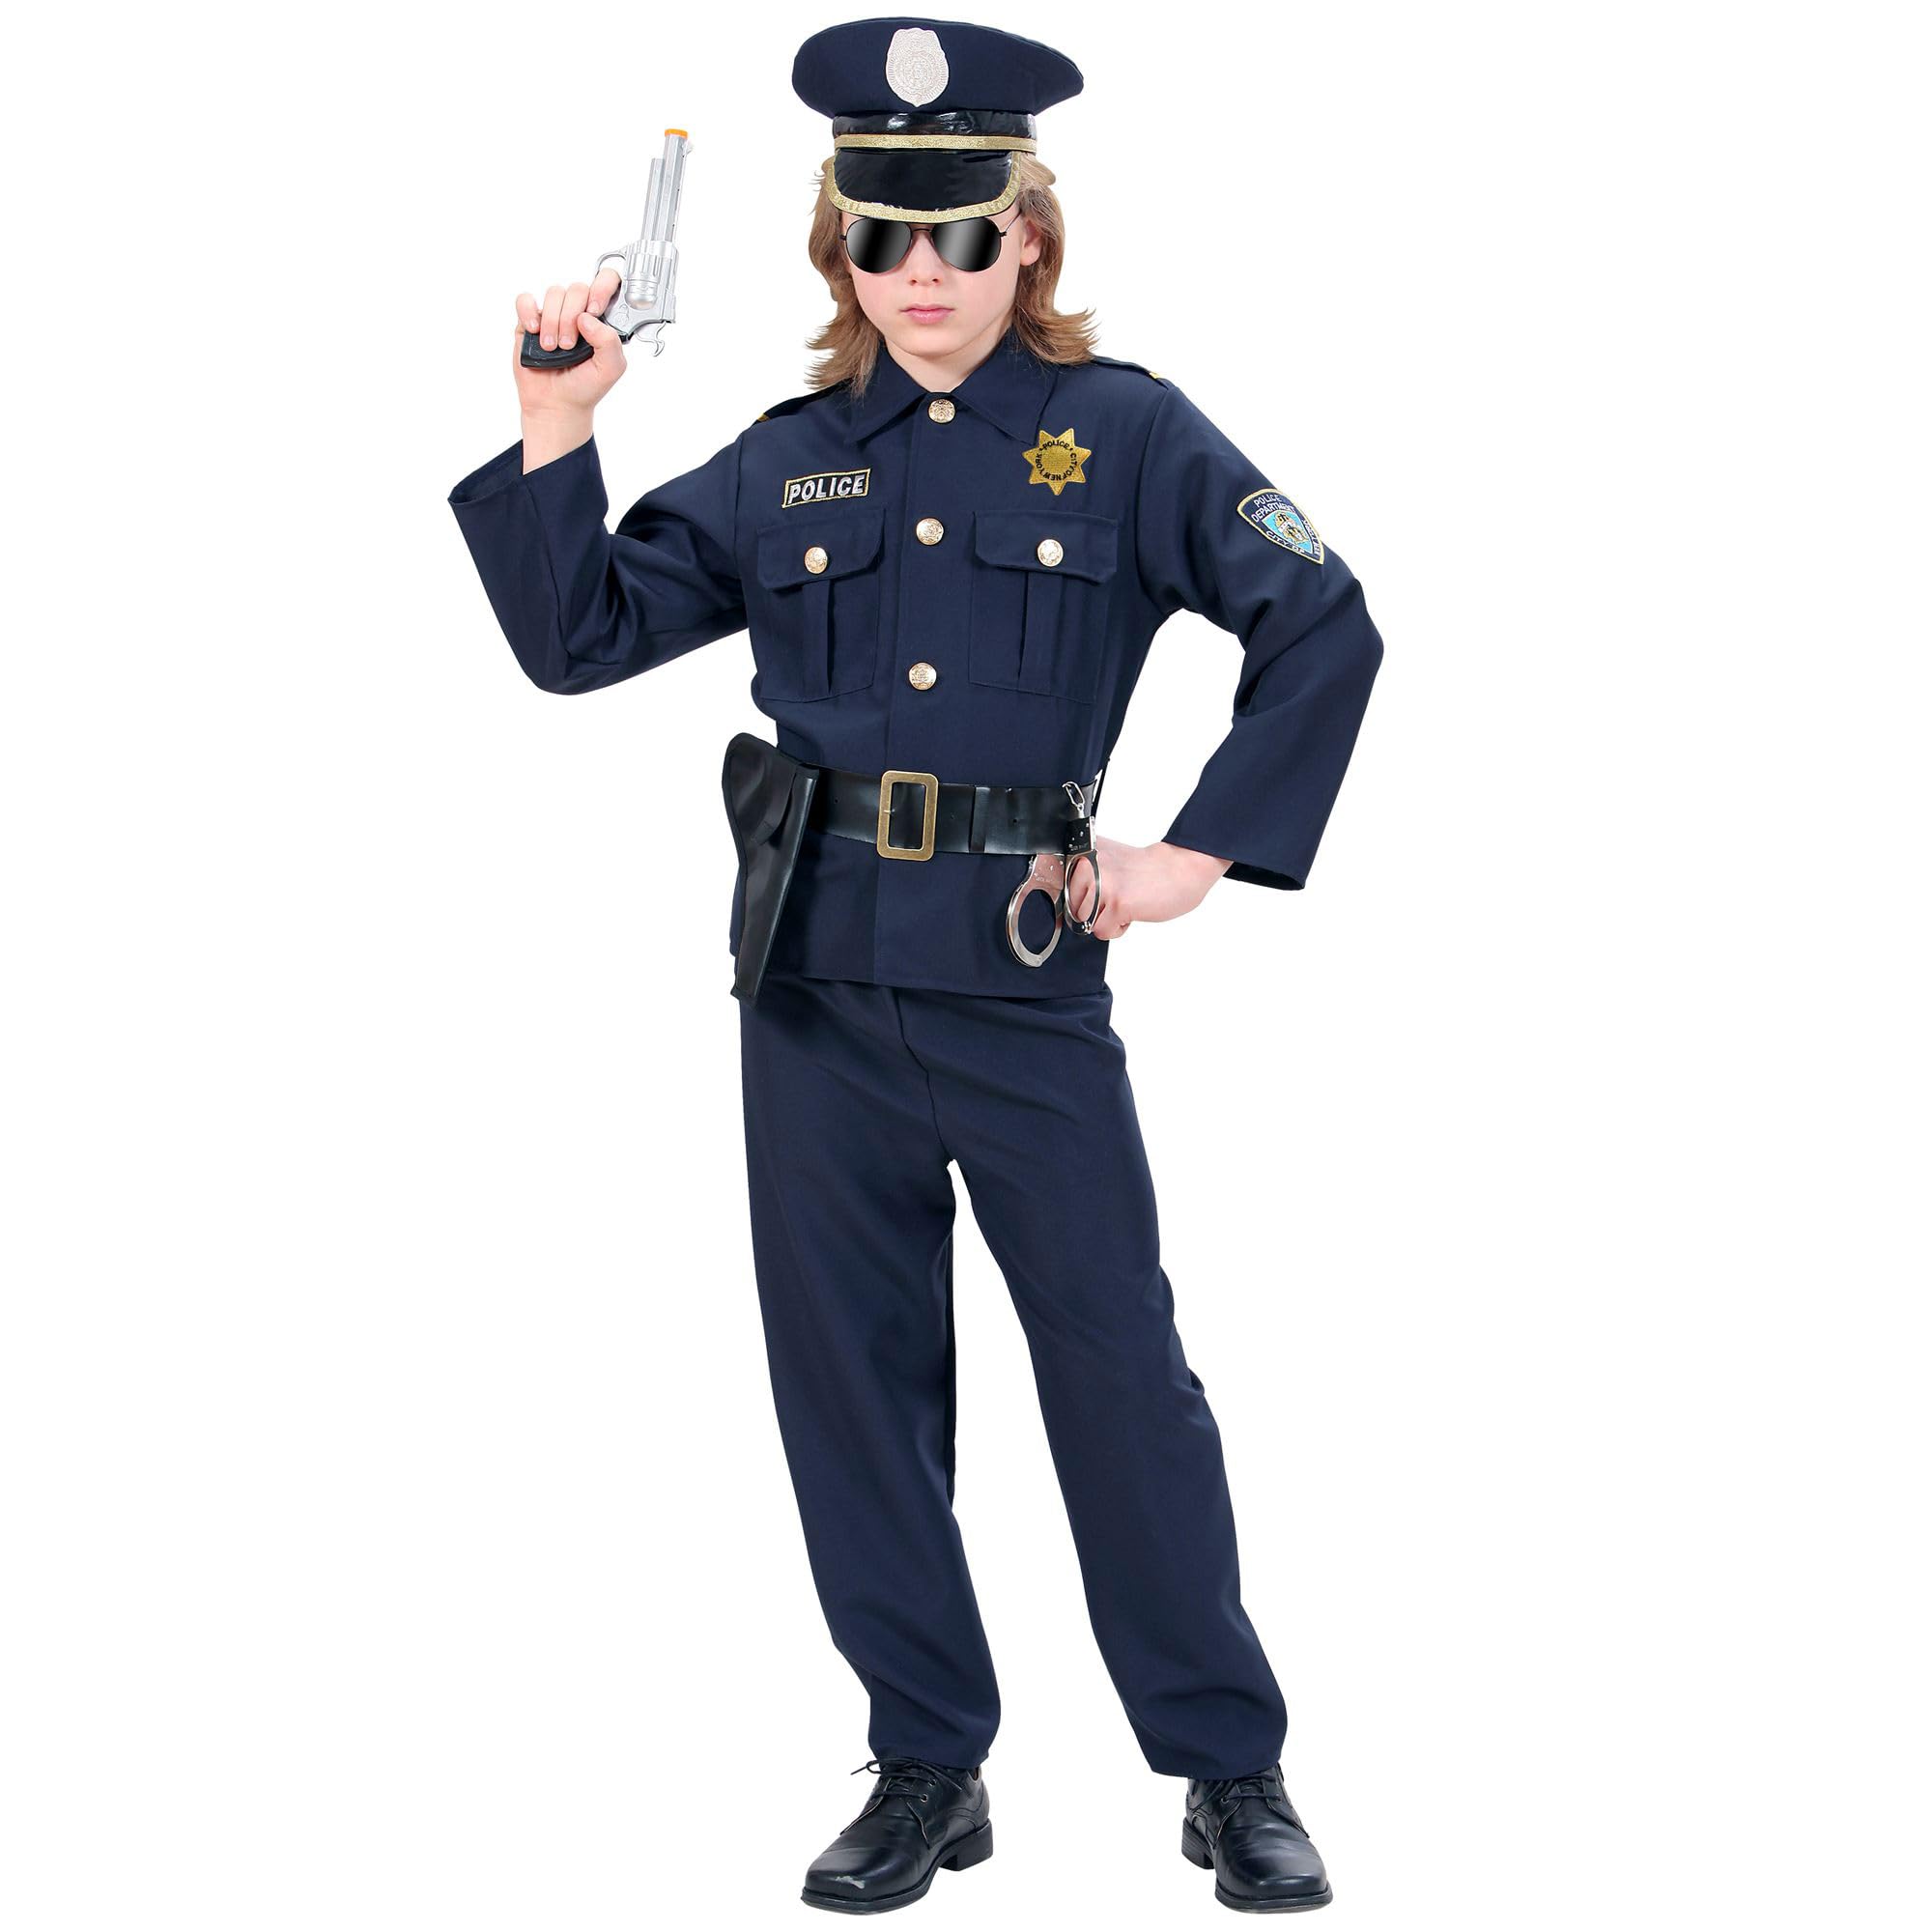 "POLICEMAN" (coat, pants, belt with holster, hat) - (128 cm / 5-7 Years)